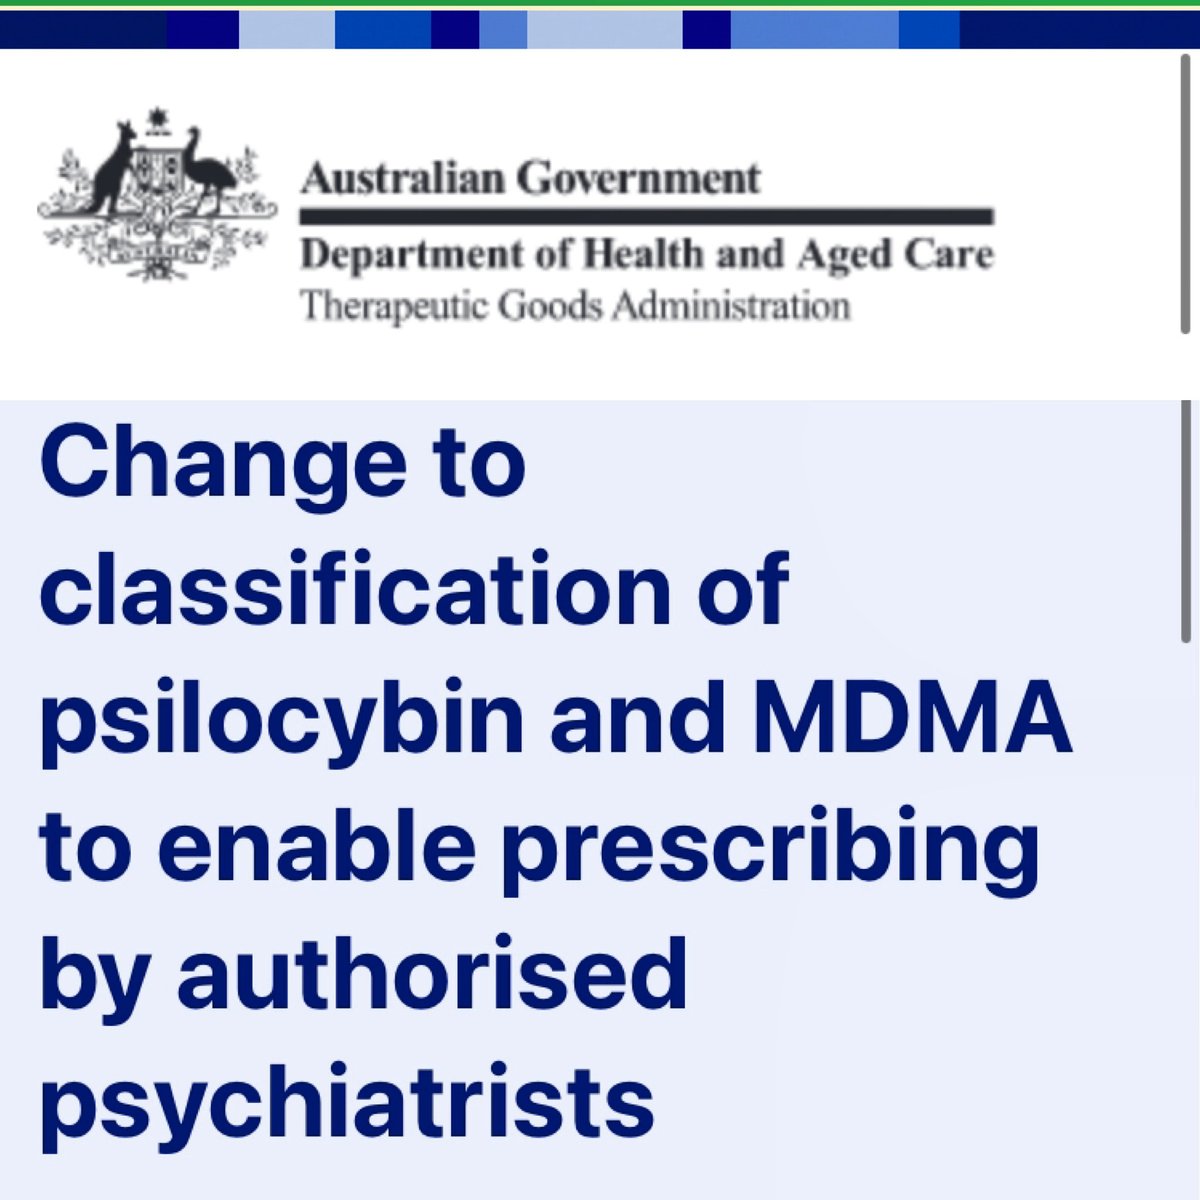 Congratulations @ProfDavidNutt for convincing the Australians to pioneer the #PsychedelicRenaissance! Major victory for Australia @AlboMP! Let’s hope more countries will join in on this massive victory for science soon. #MDMAforPTSD